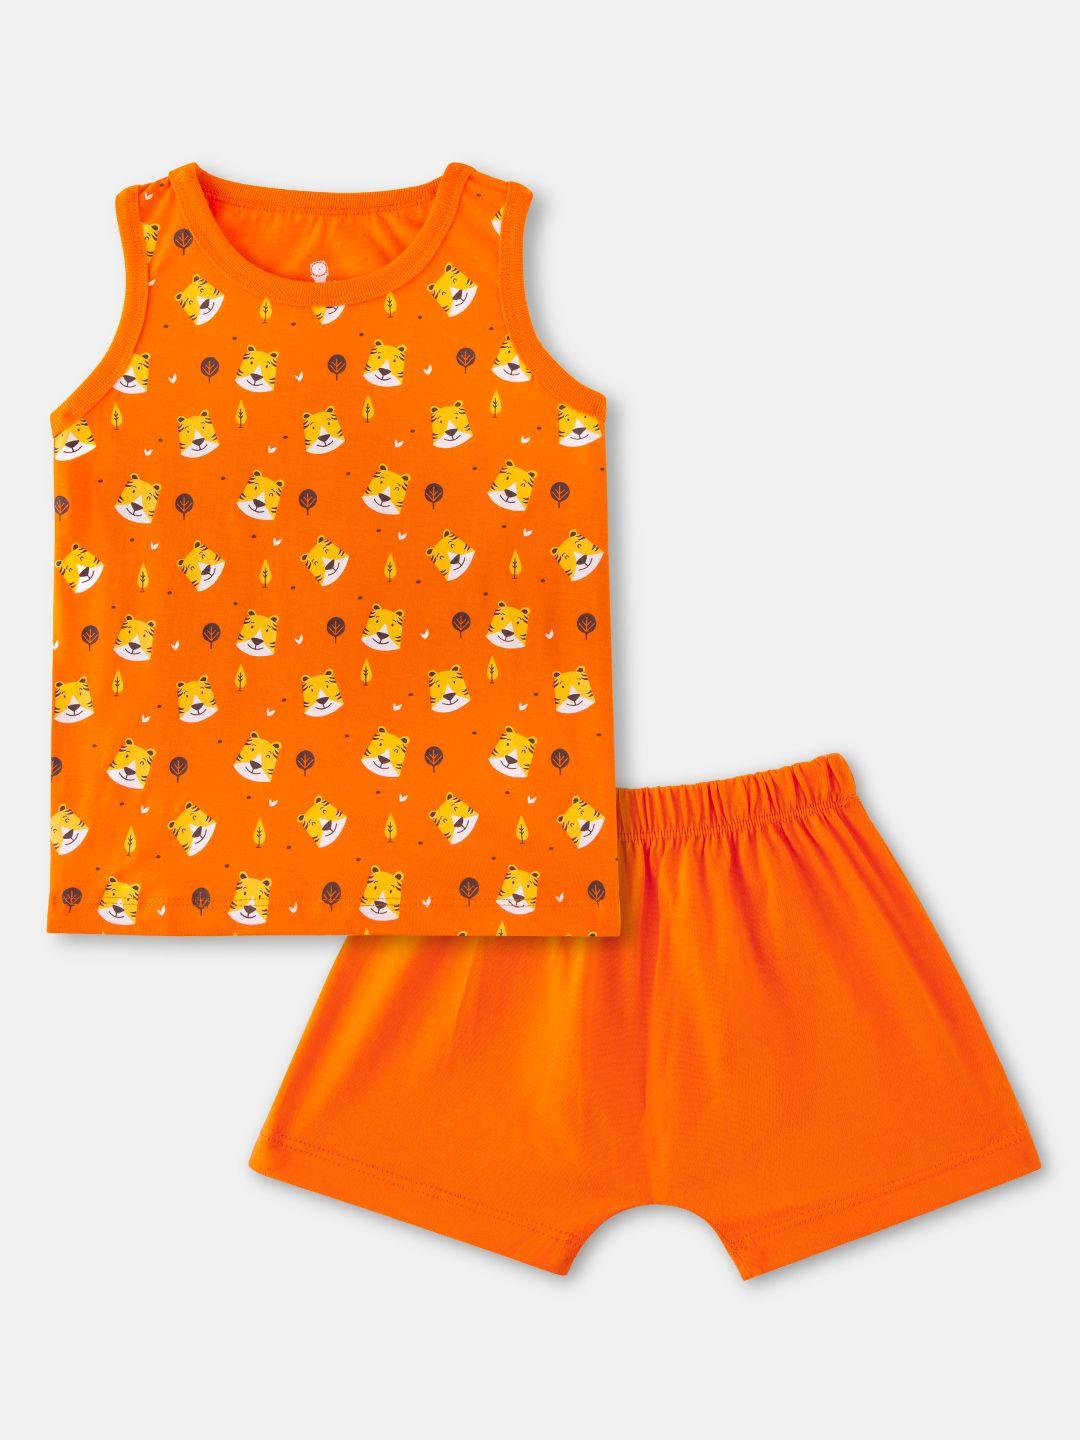 cuddles for cubs kids orange & yellow printed pure cotton top with shorts